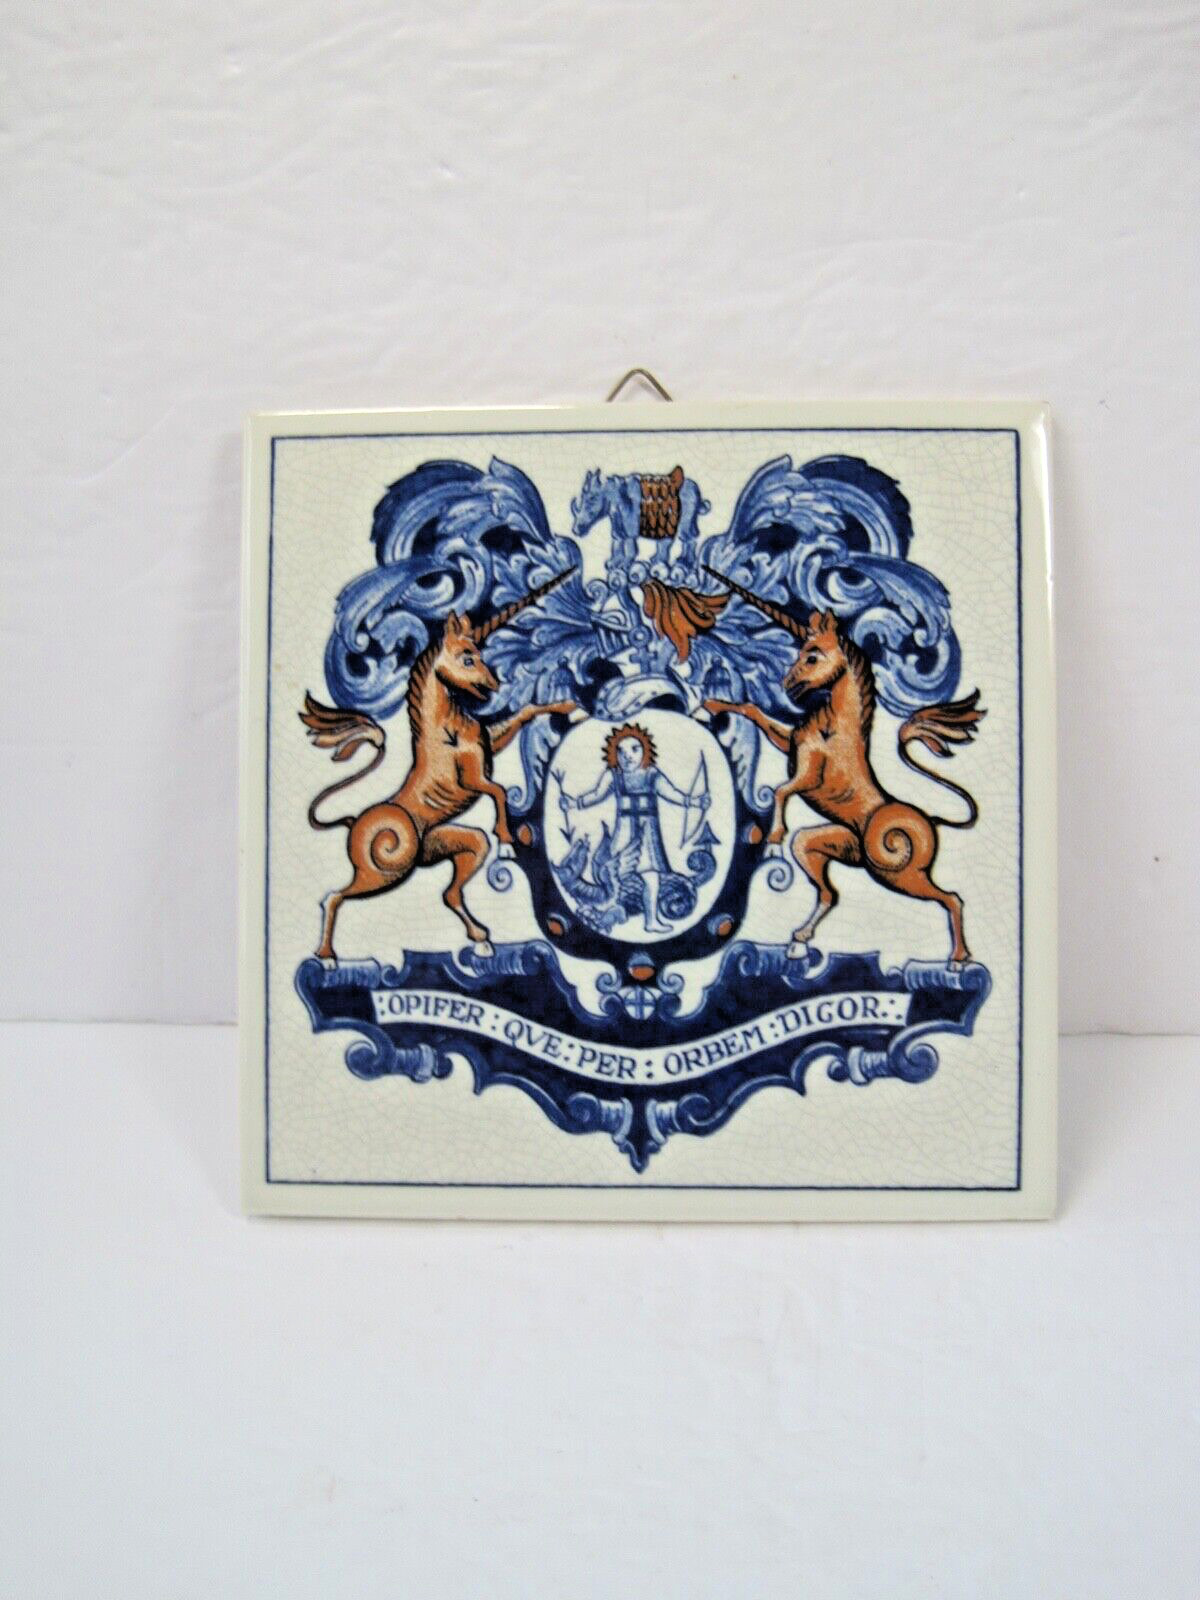 Delft Holland London Hand Made Medical Apothecaries Crest Tile Unicorns Dragon